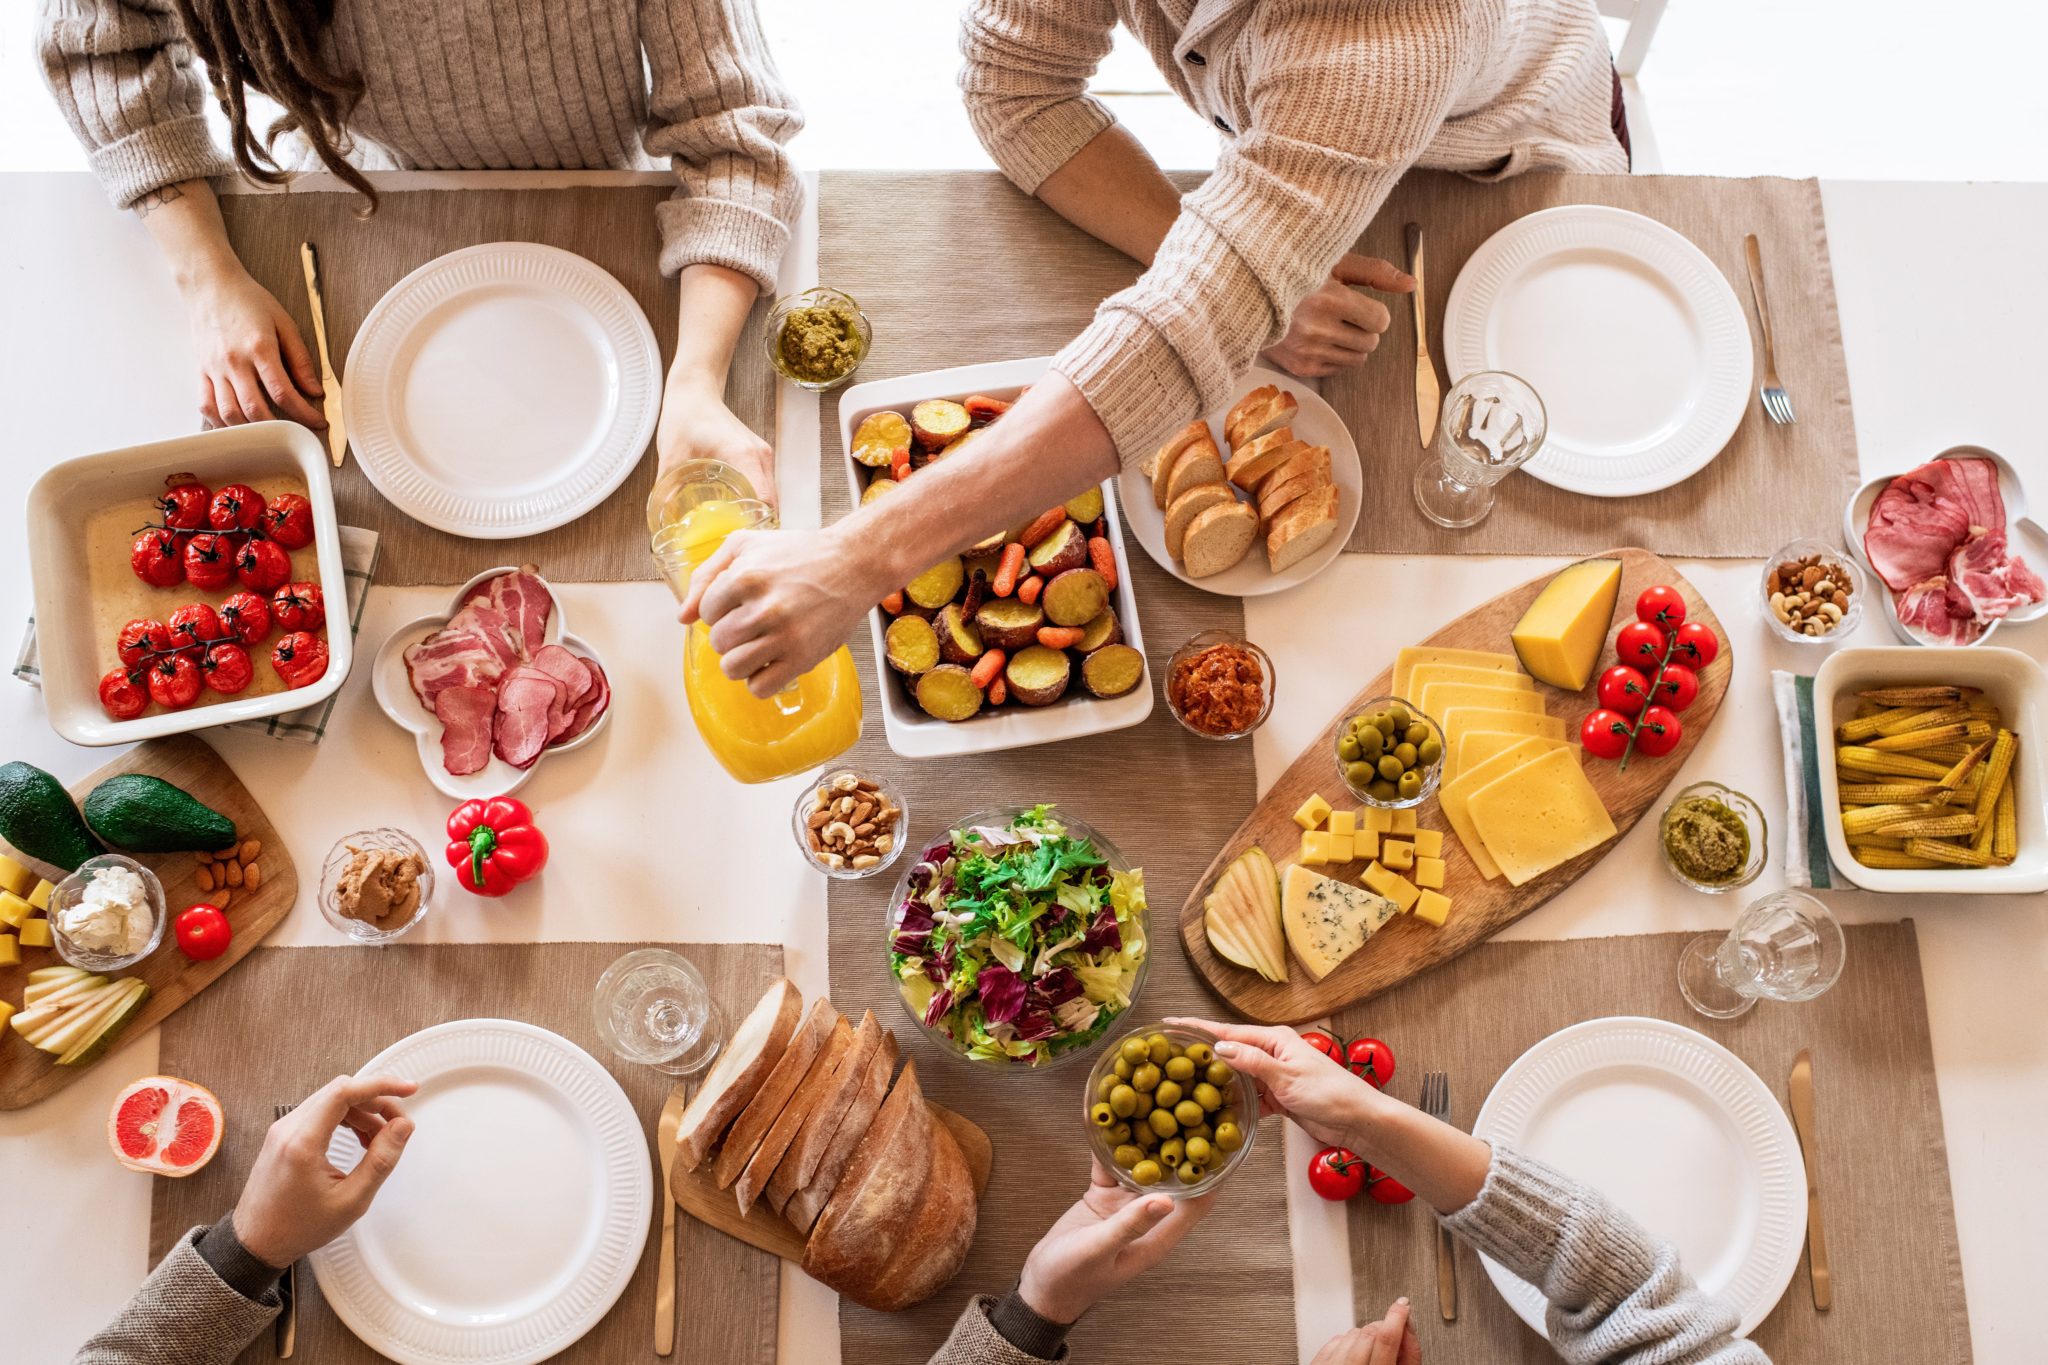 25 Conversation Topics for Connecting at the Dinner Table - San-J